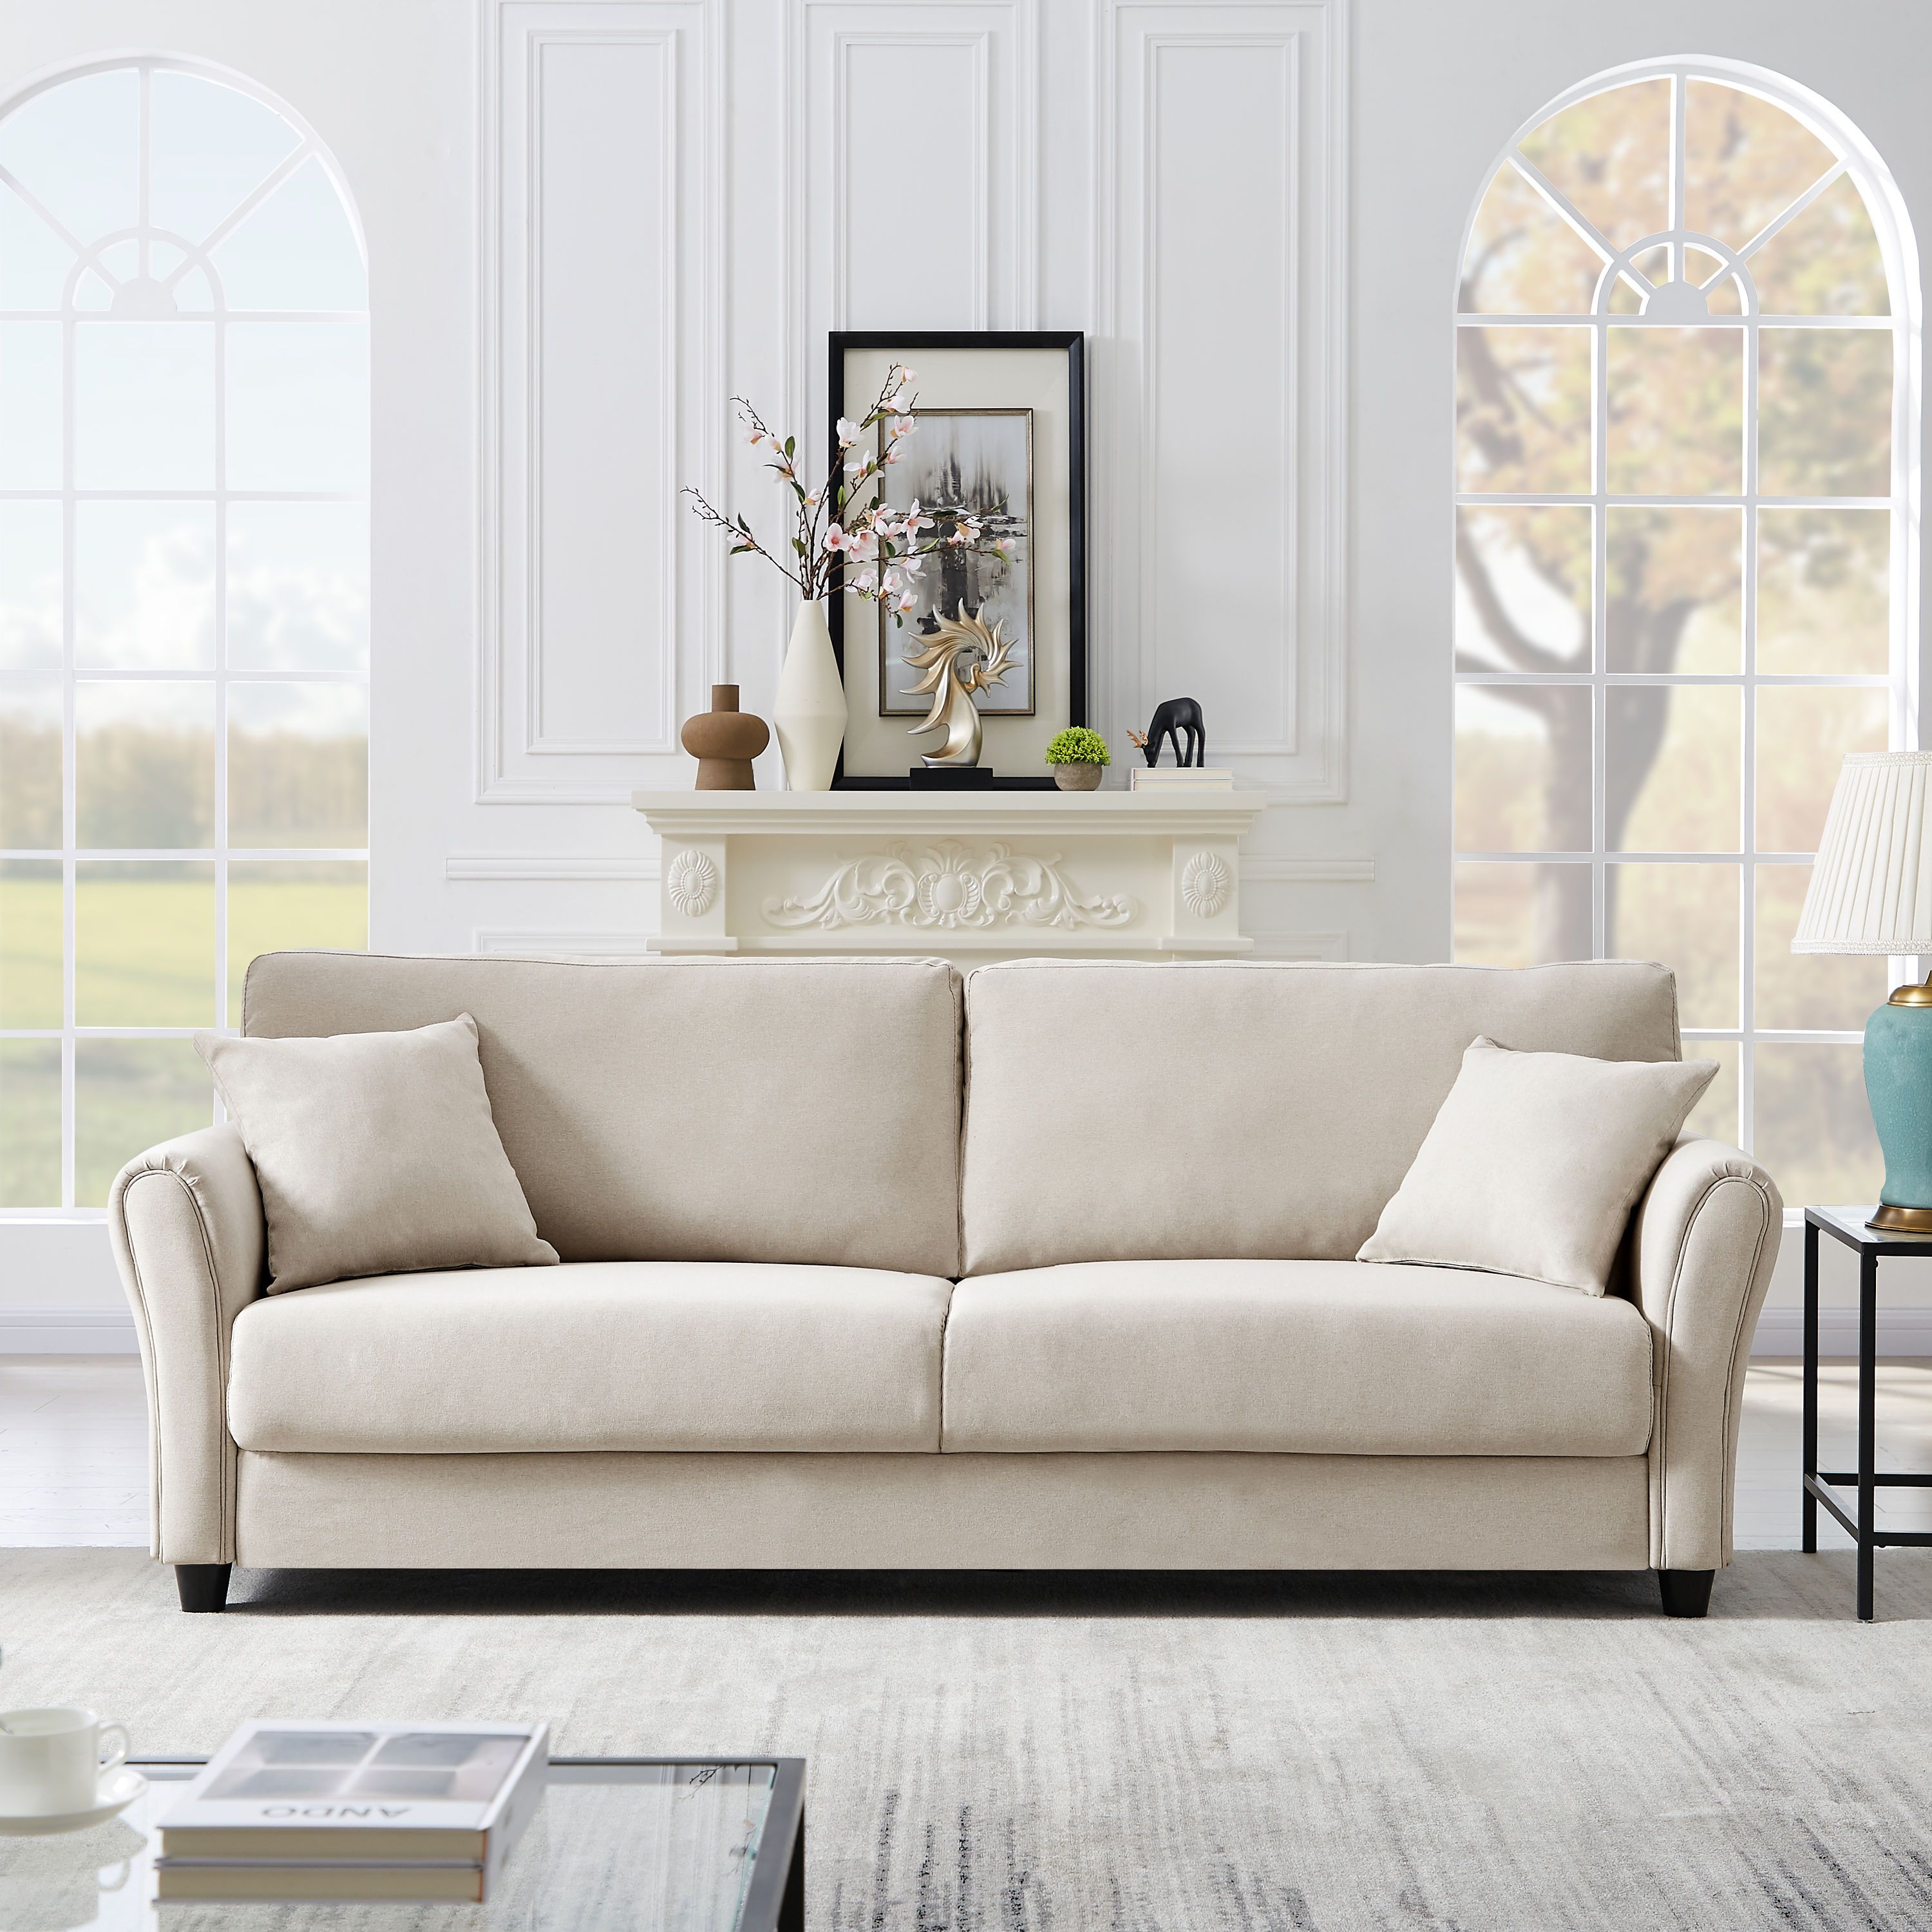 Casainc Fabric 3 Seater Sofa Modern Beige Linen Sofa In The Couches, Sofas  & Loveseats Department At Lowes In Modern Linen Fabric Sofa Sets (View 11 of 20)